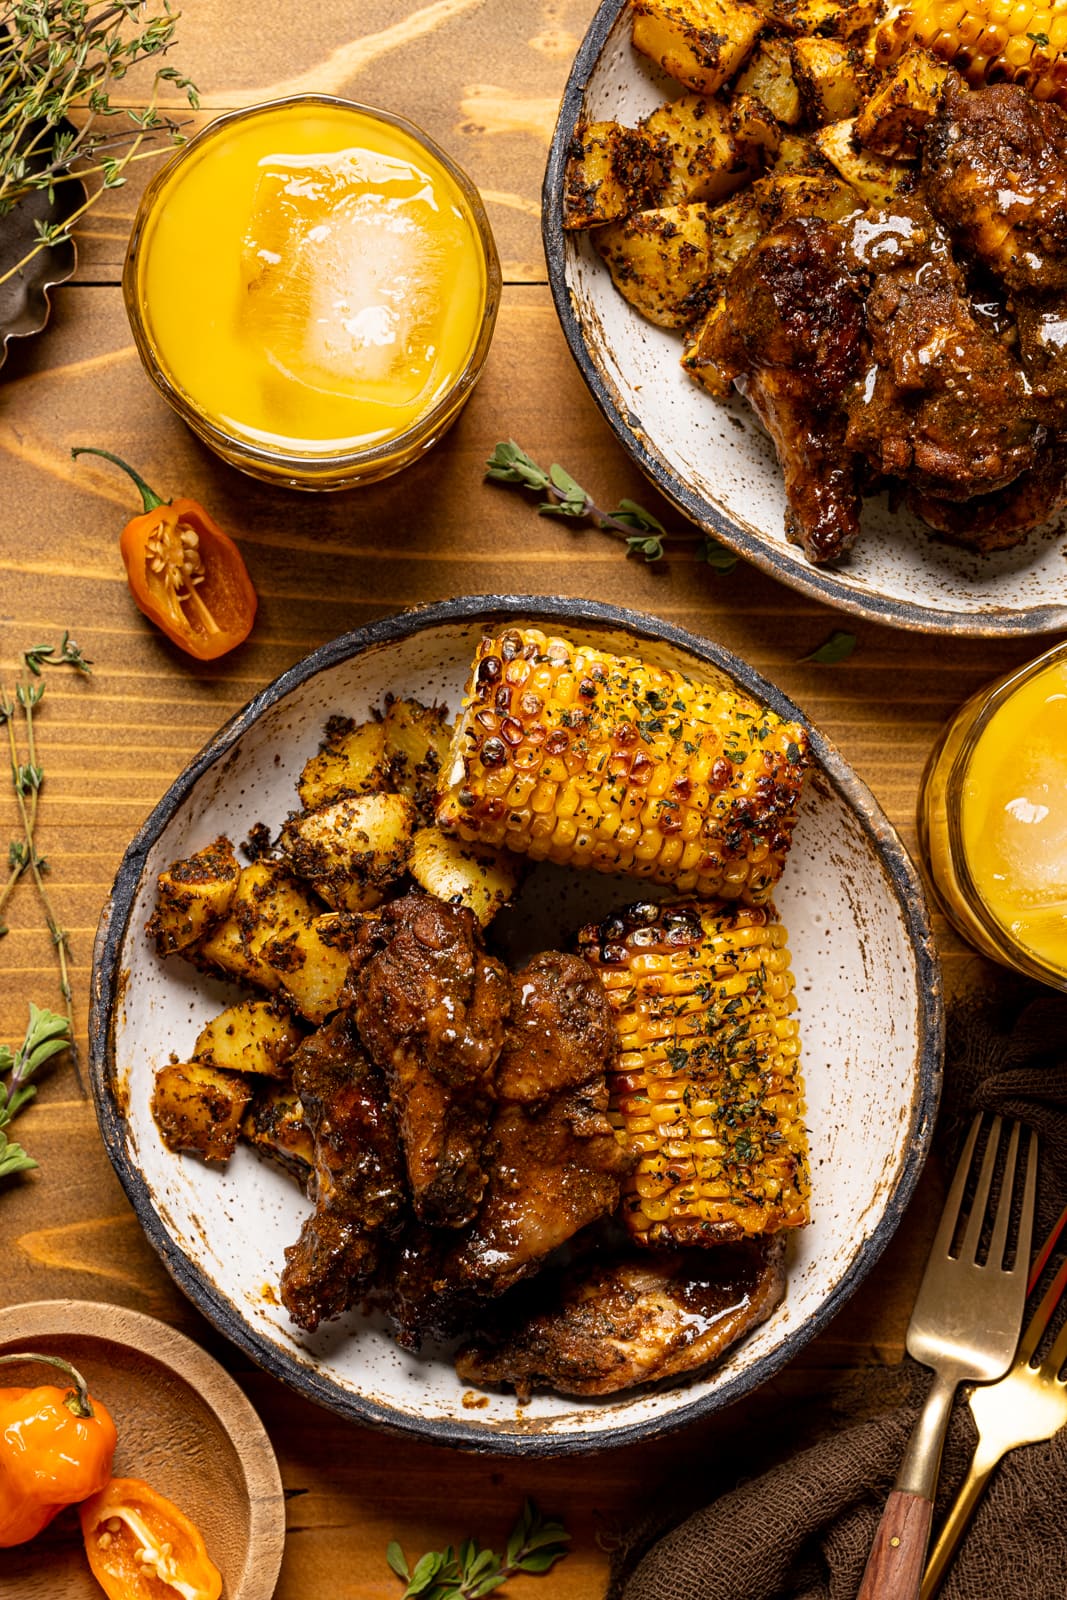 Chicken wings in a bowl with corn and potatoes on a brown wood table with drinks.